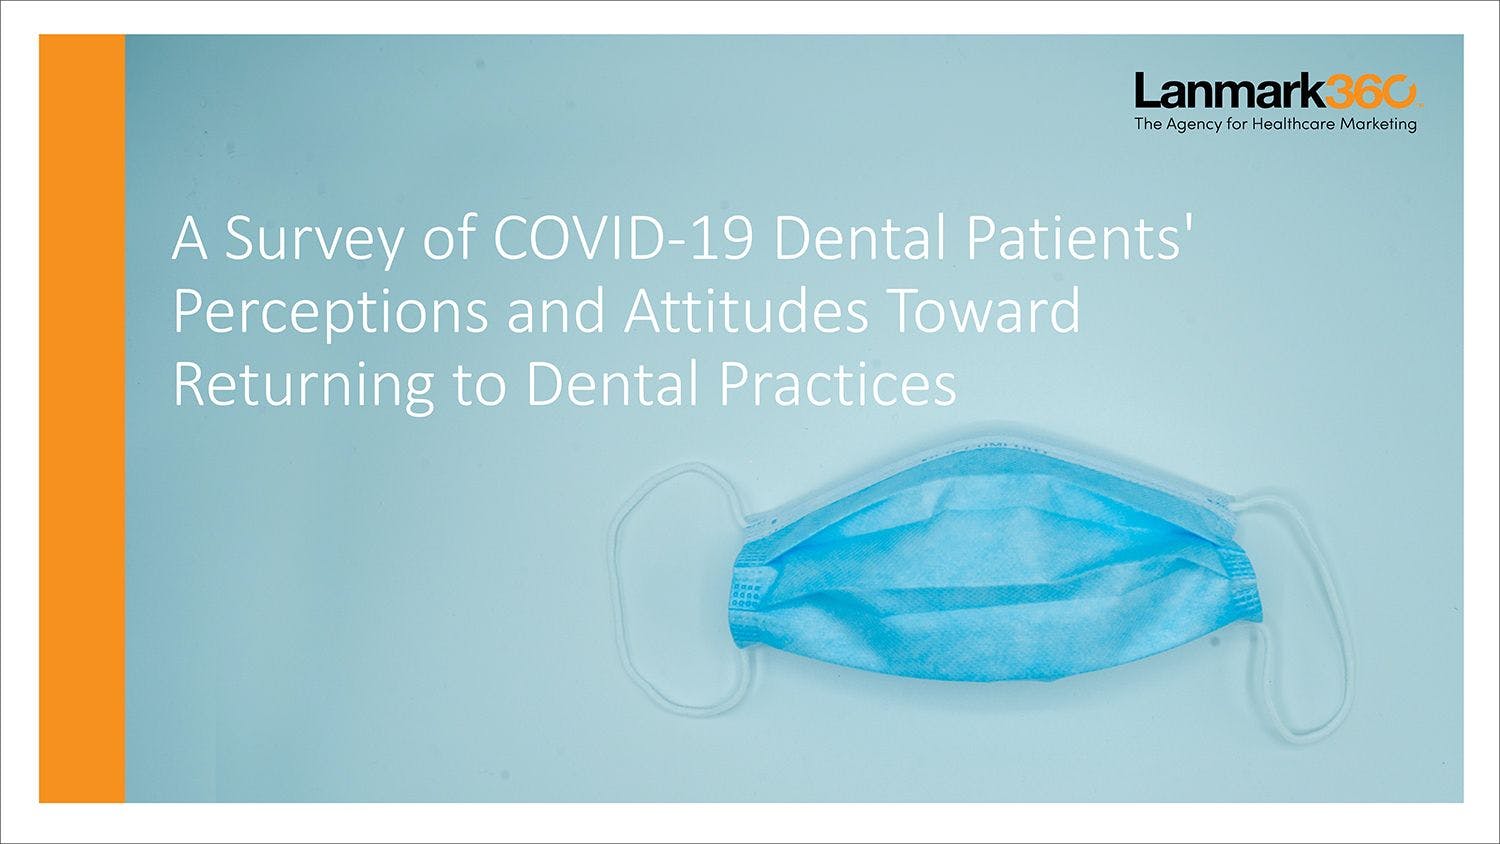 Lanmark360 survey shows most consumers ready to return for dental care